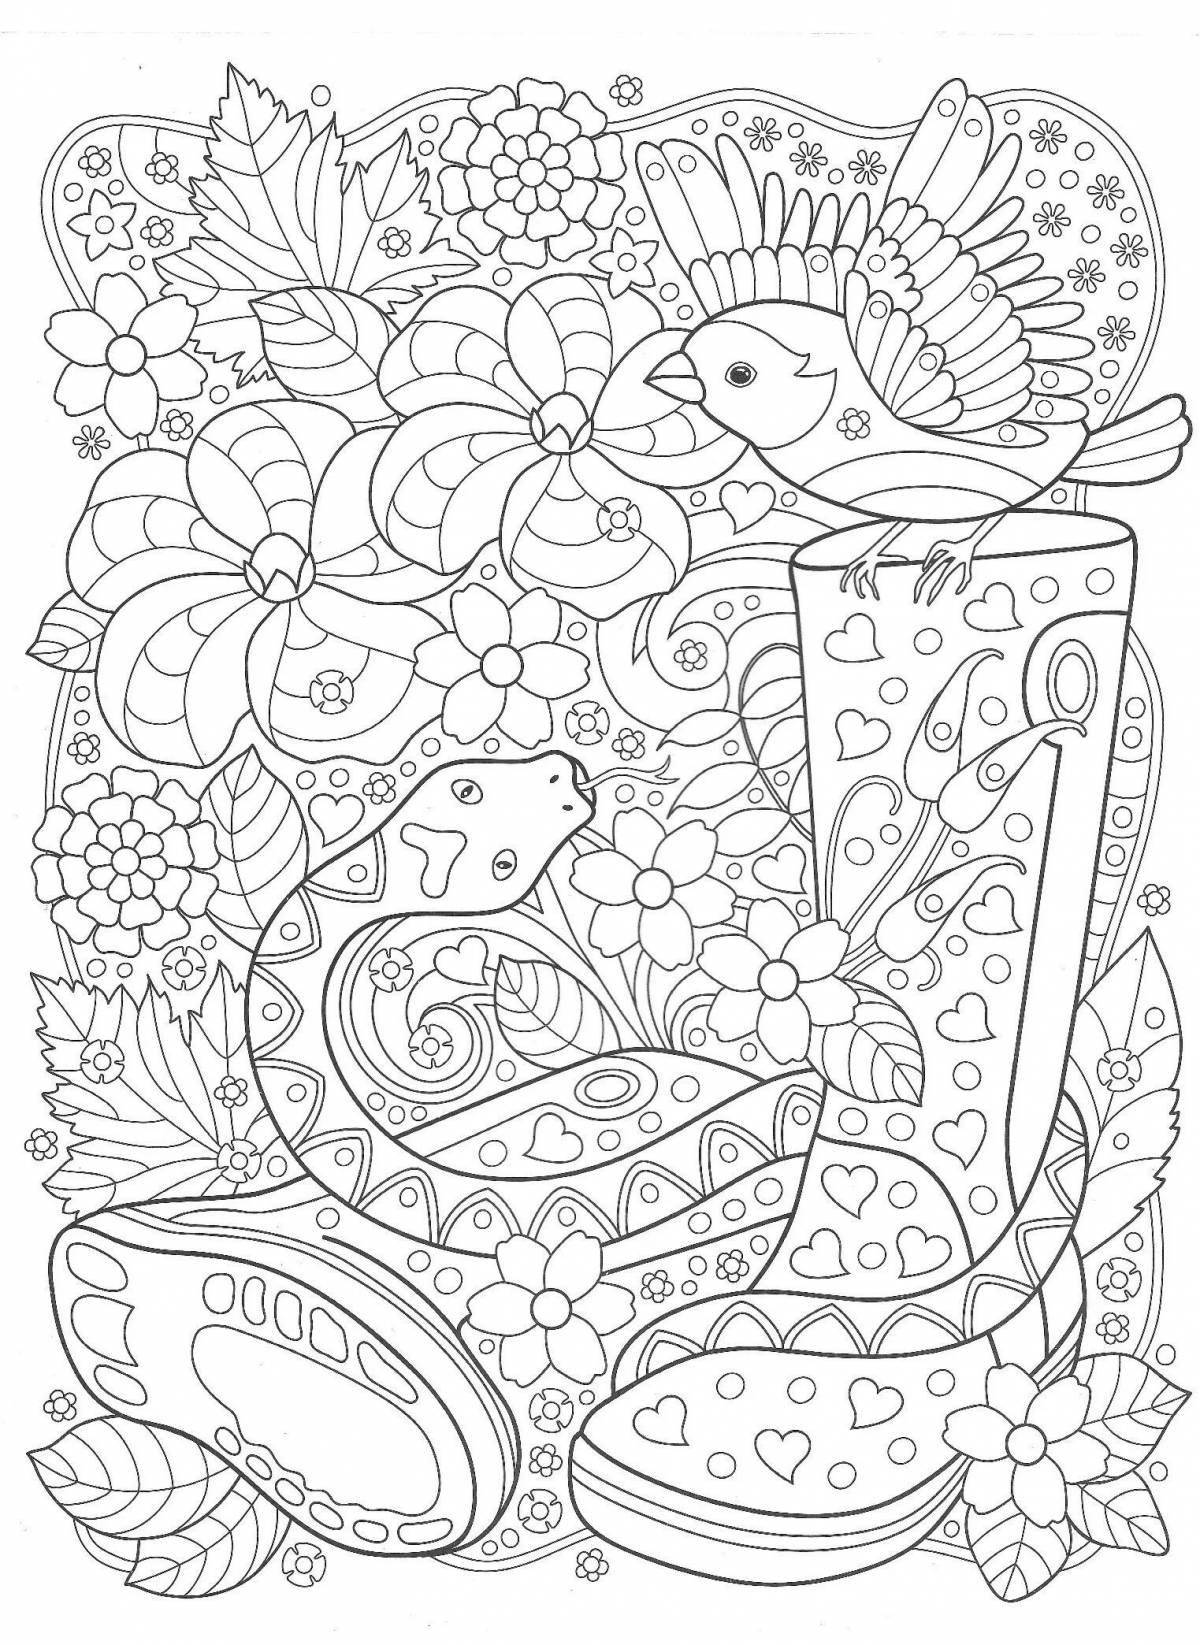 Bright anti-stress coloring book for girls